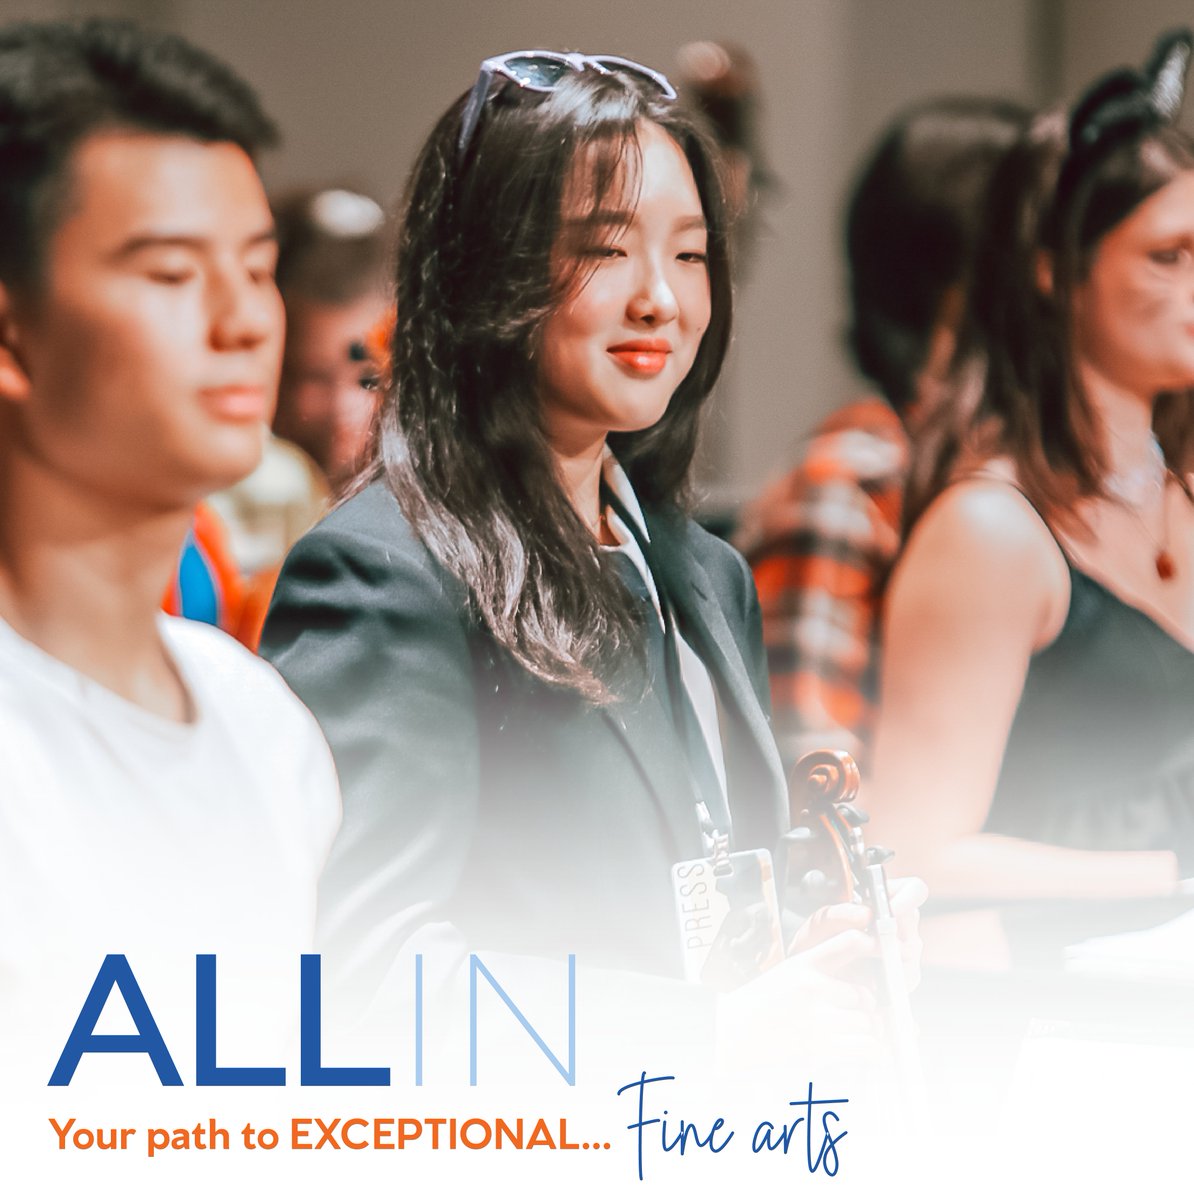 This is 💯 where you belong. Enroll today at IowaCitySchools.org/Enroll! We’re #ALLin on creating exceptional opportunities for our students. Learn how our FINE ARTS set us apart from the rest at IowaCitySchools.org/FineArts. #WhereYouBelong #BeExceptional 📷: West High Journalism